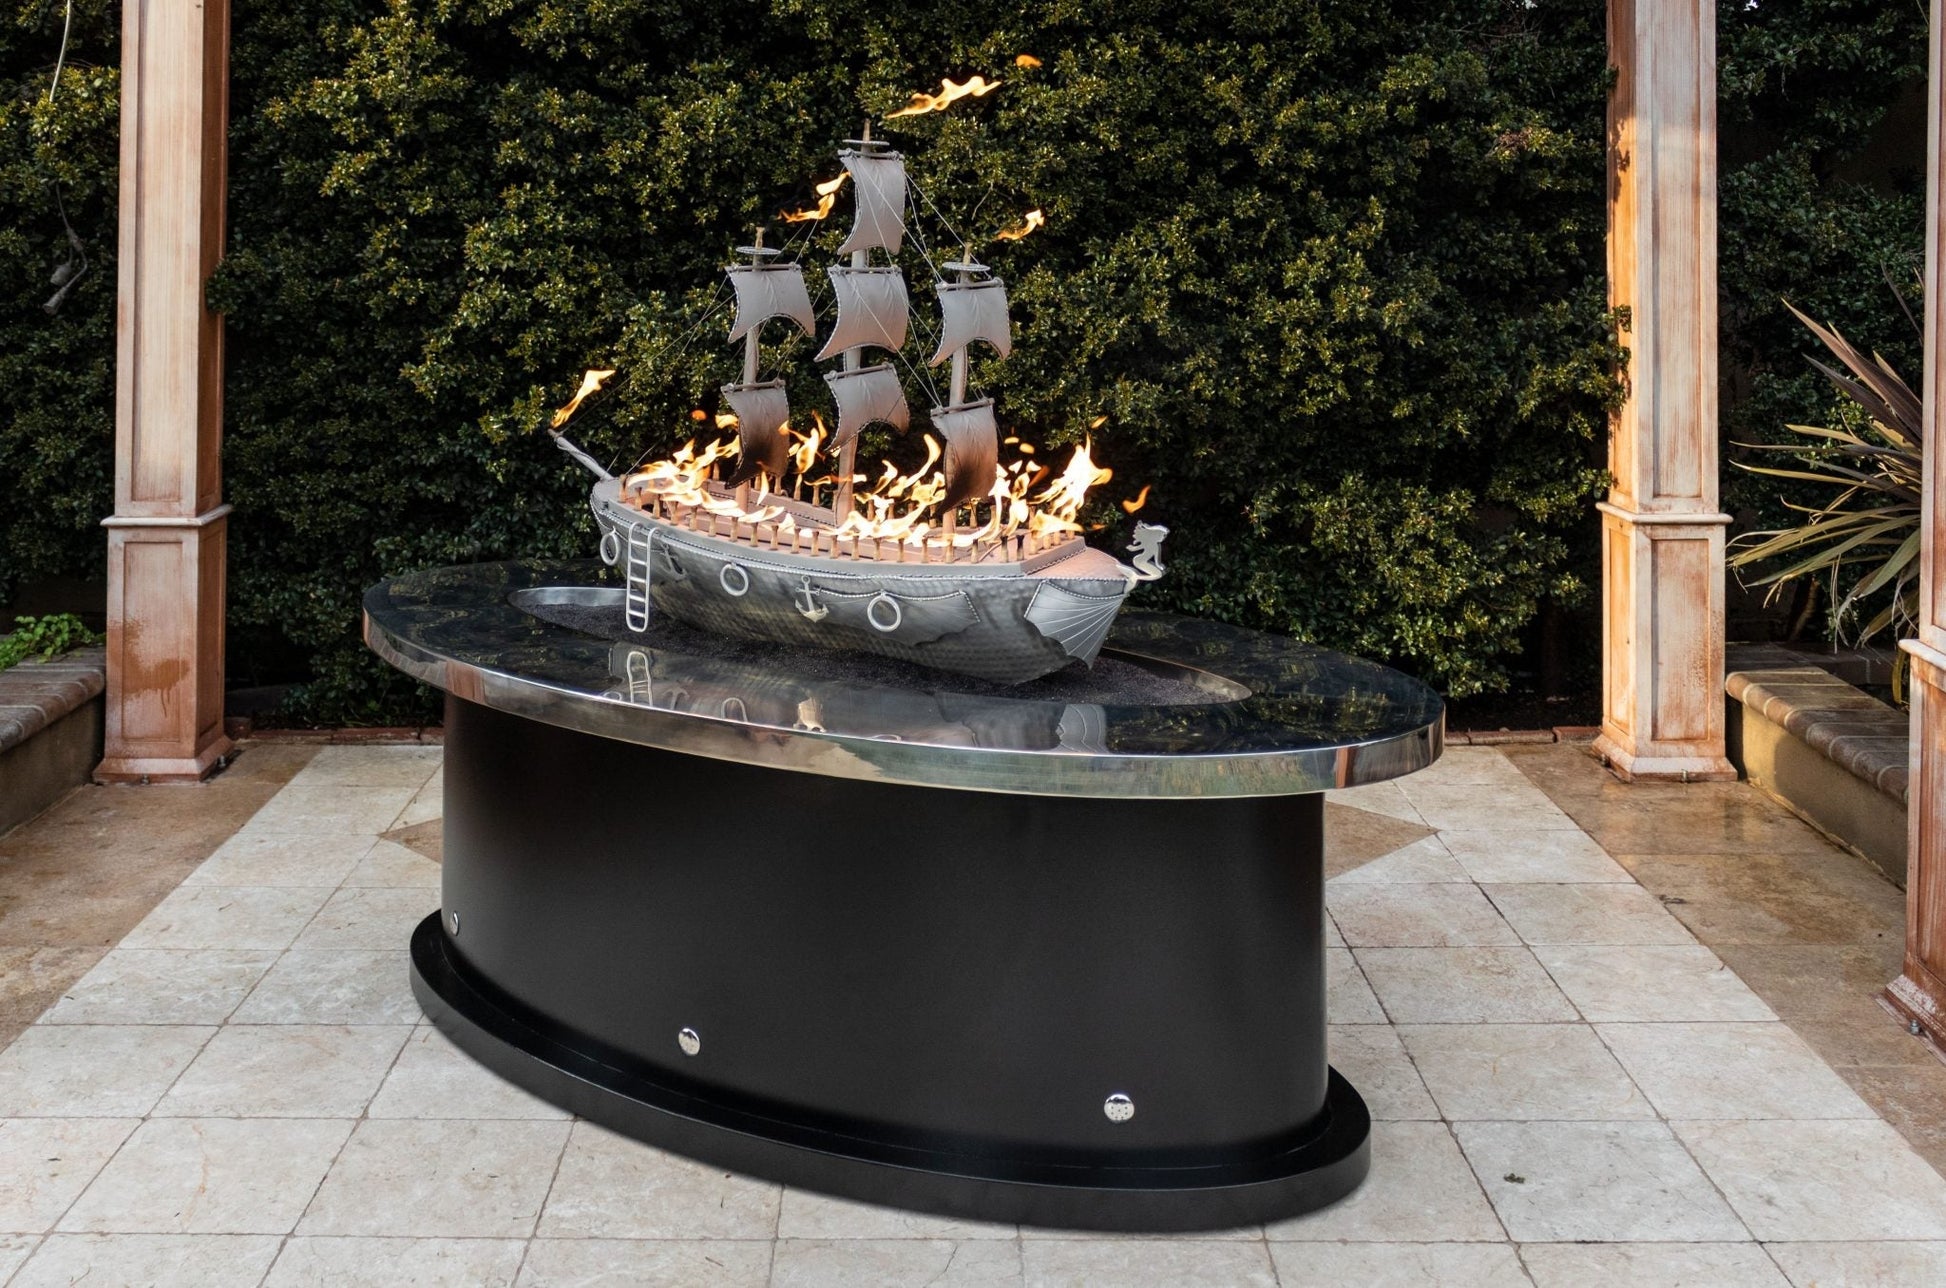 The Outdoor Plus La Pinta 72" Copper Vein Powder Coated Liquid Propane Fire Pit with Match Lit Ignition